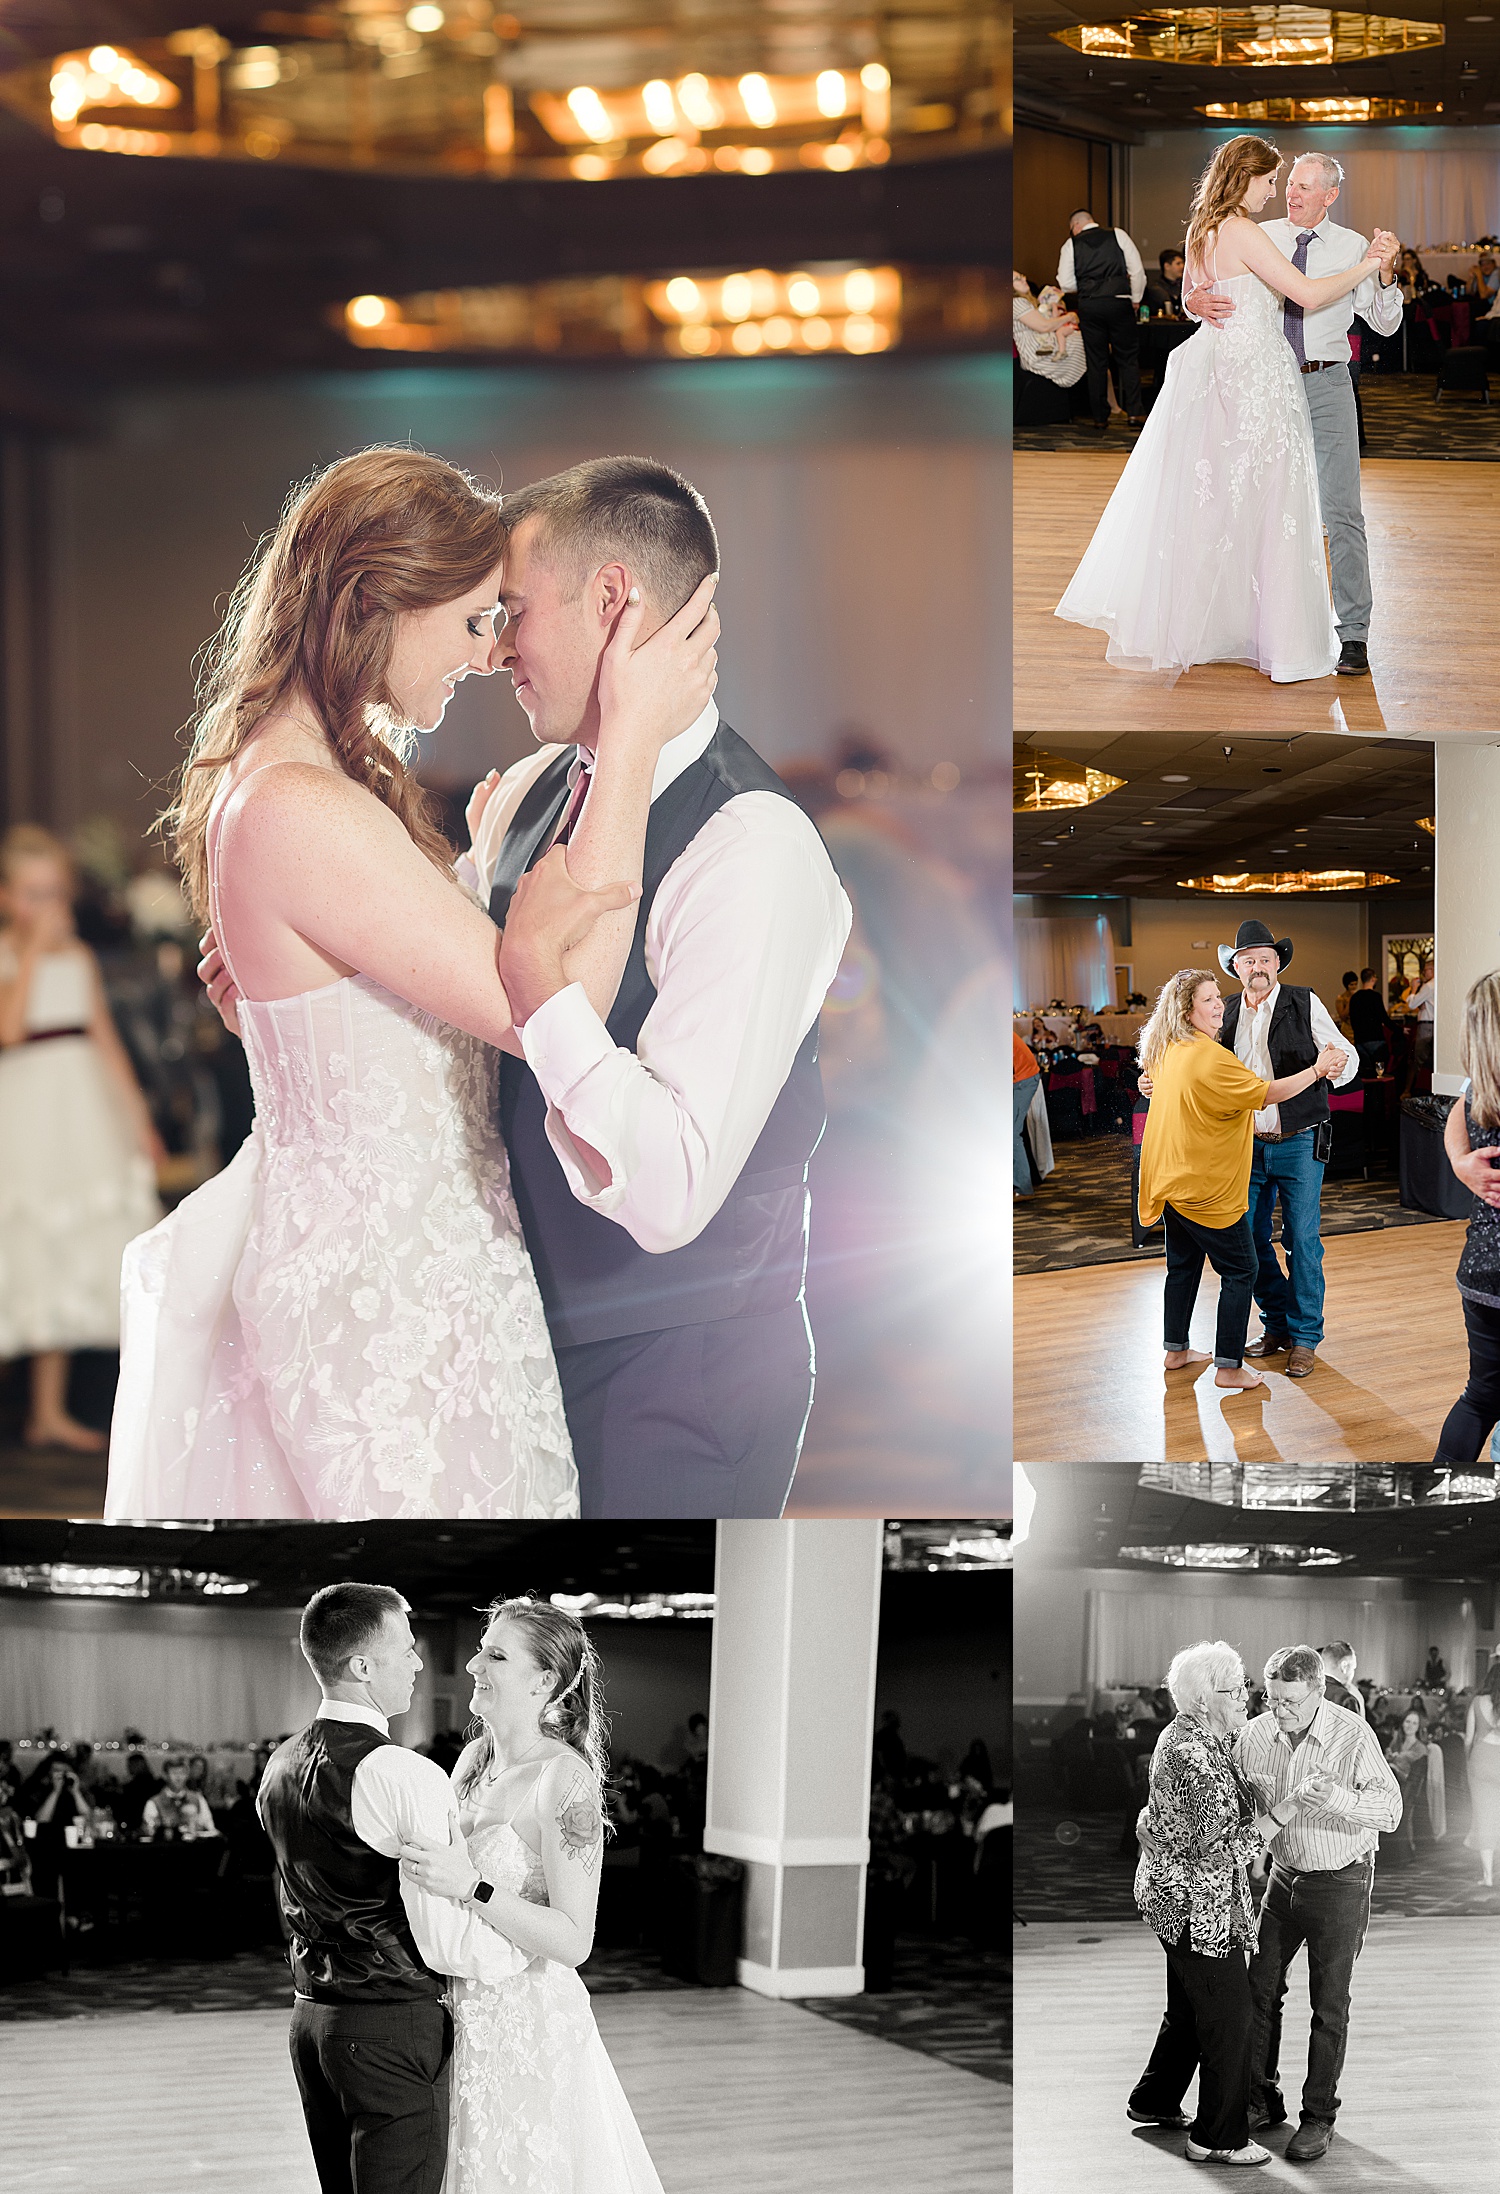 First dances with bride and groom before the rest of guests join the dance floor 